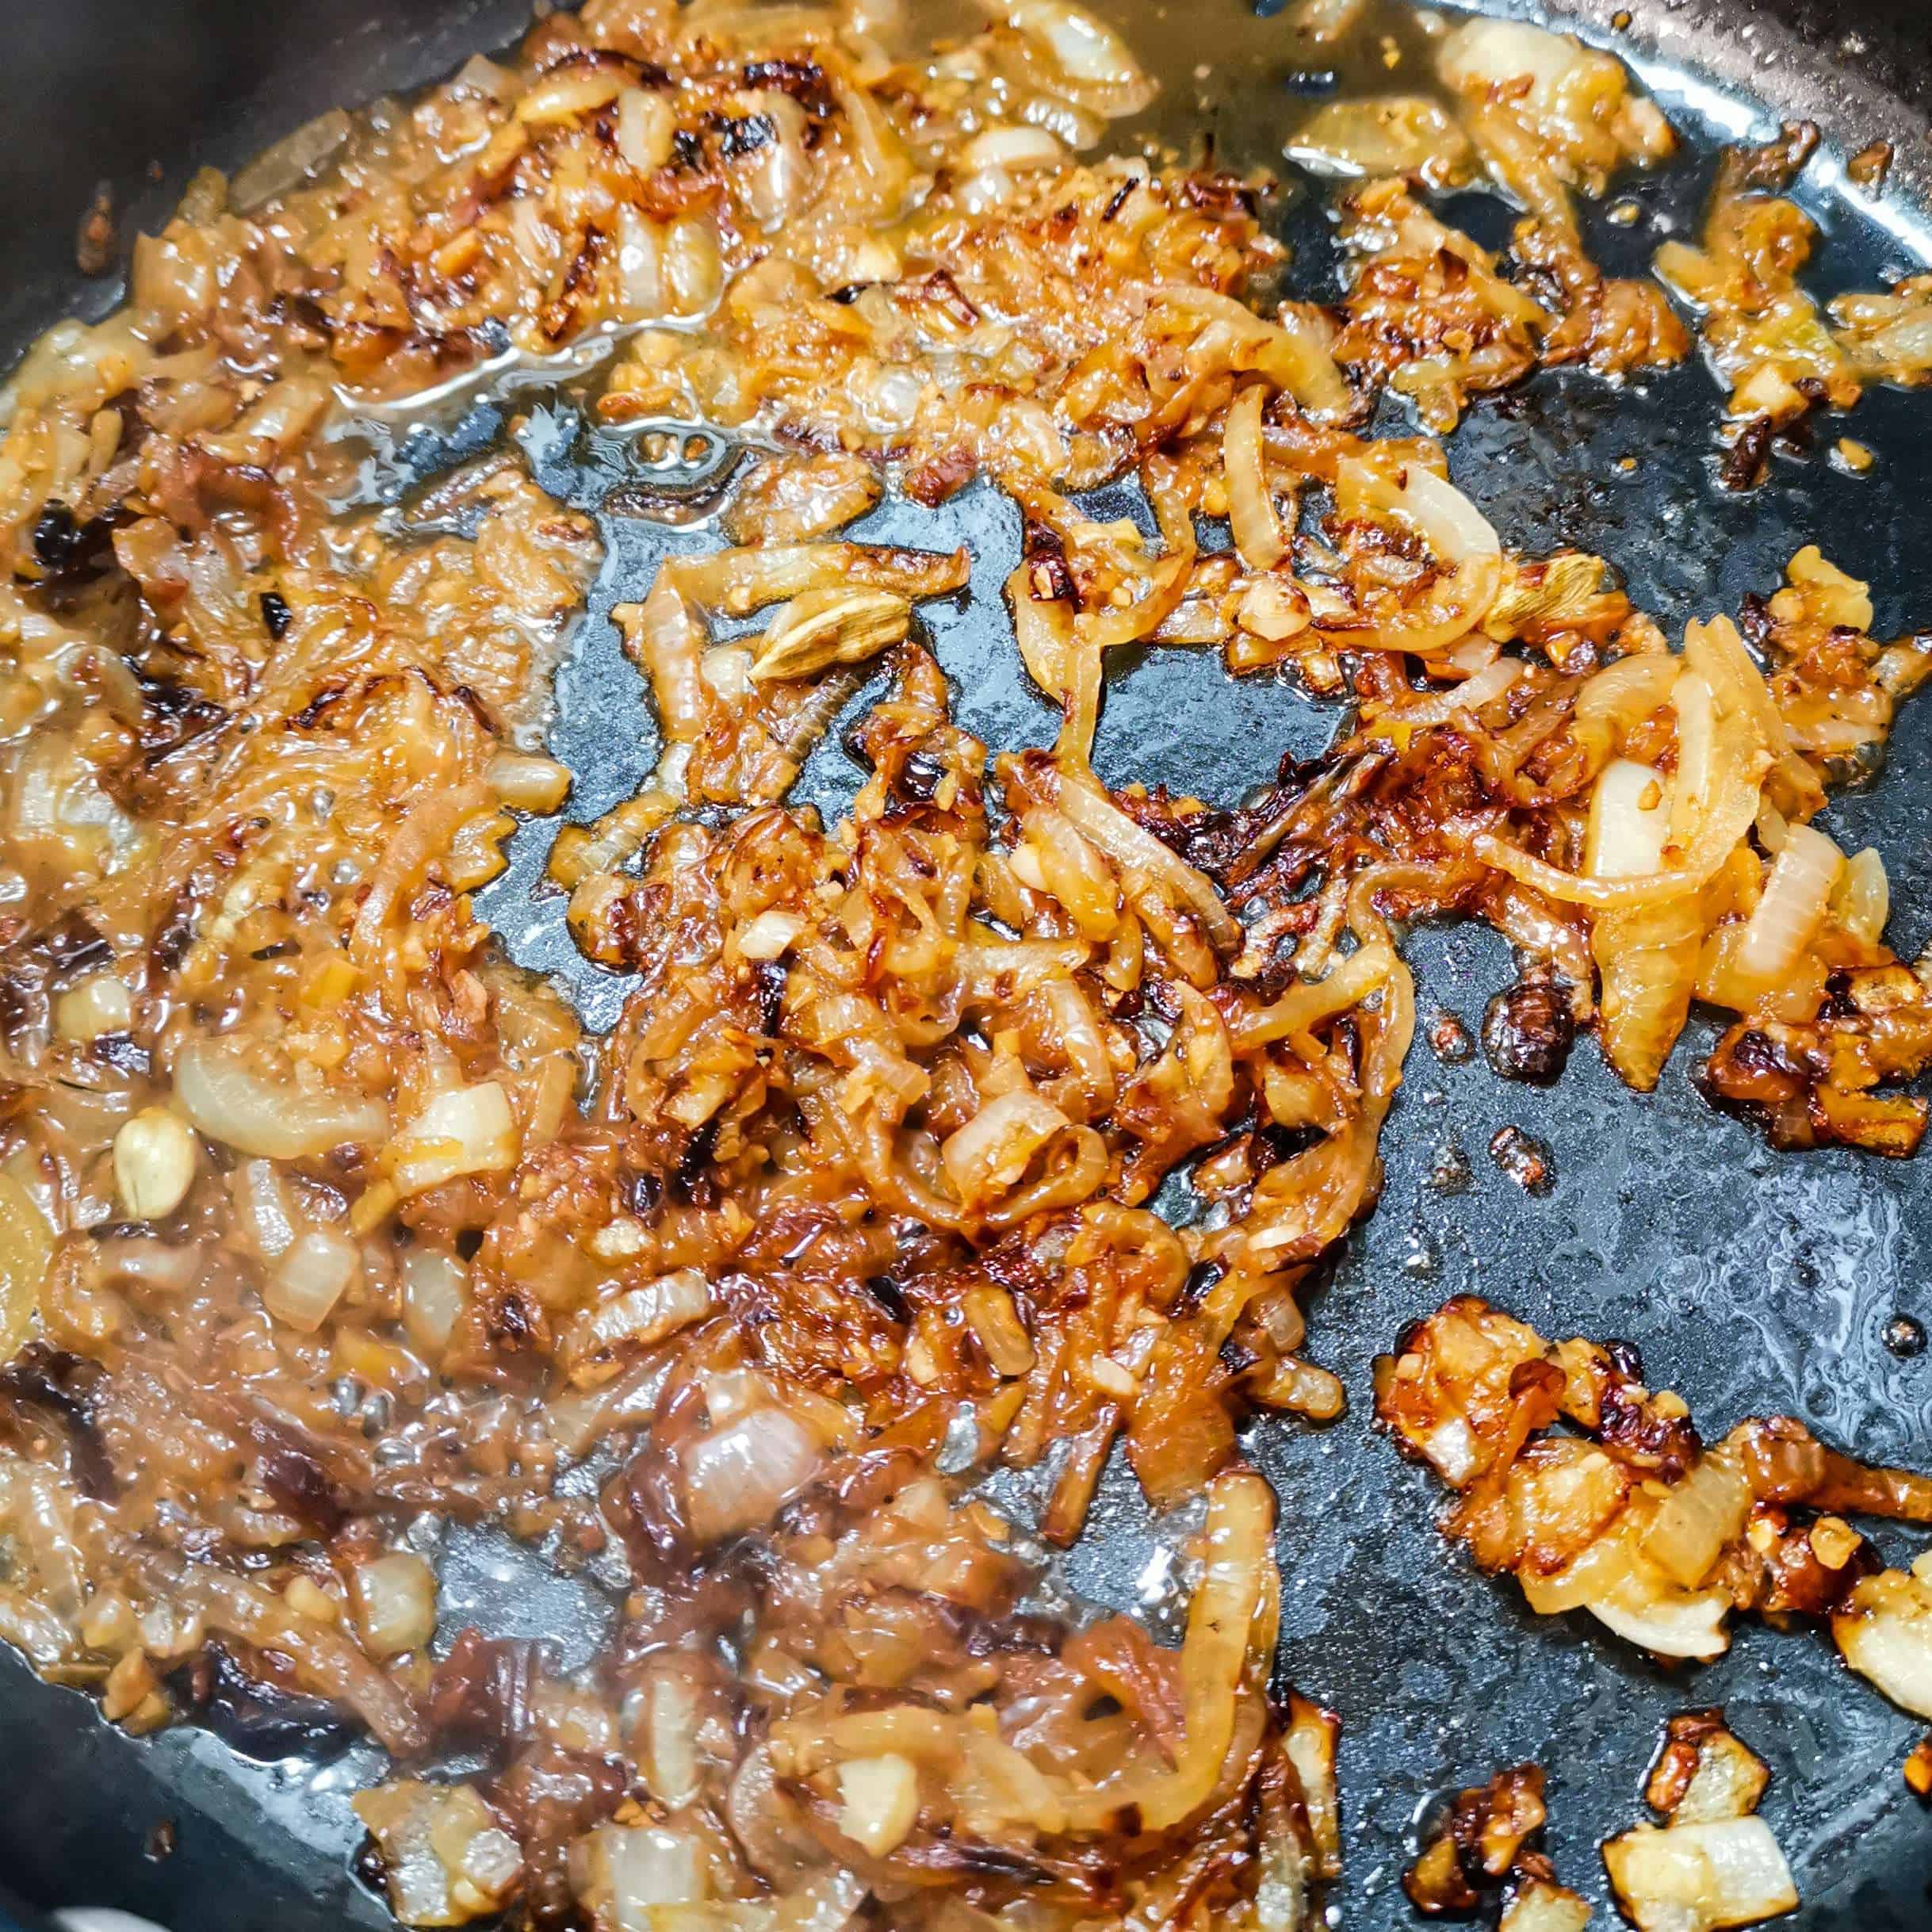 Onions in a pan water frying for a curry